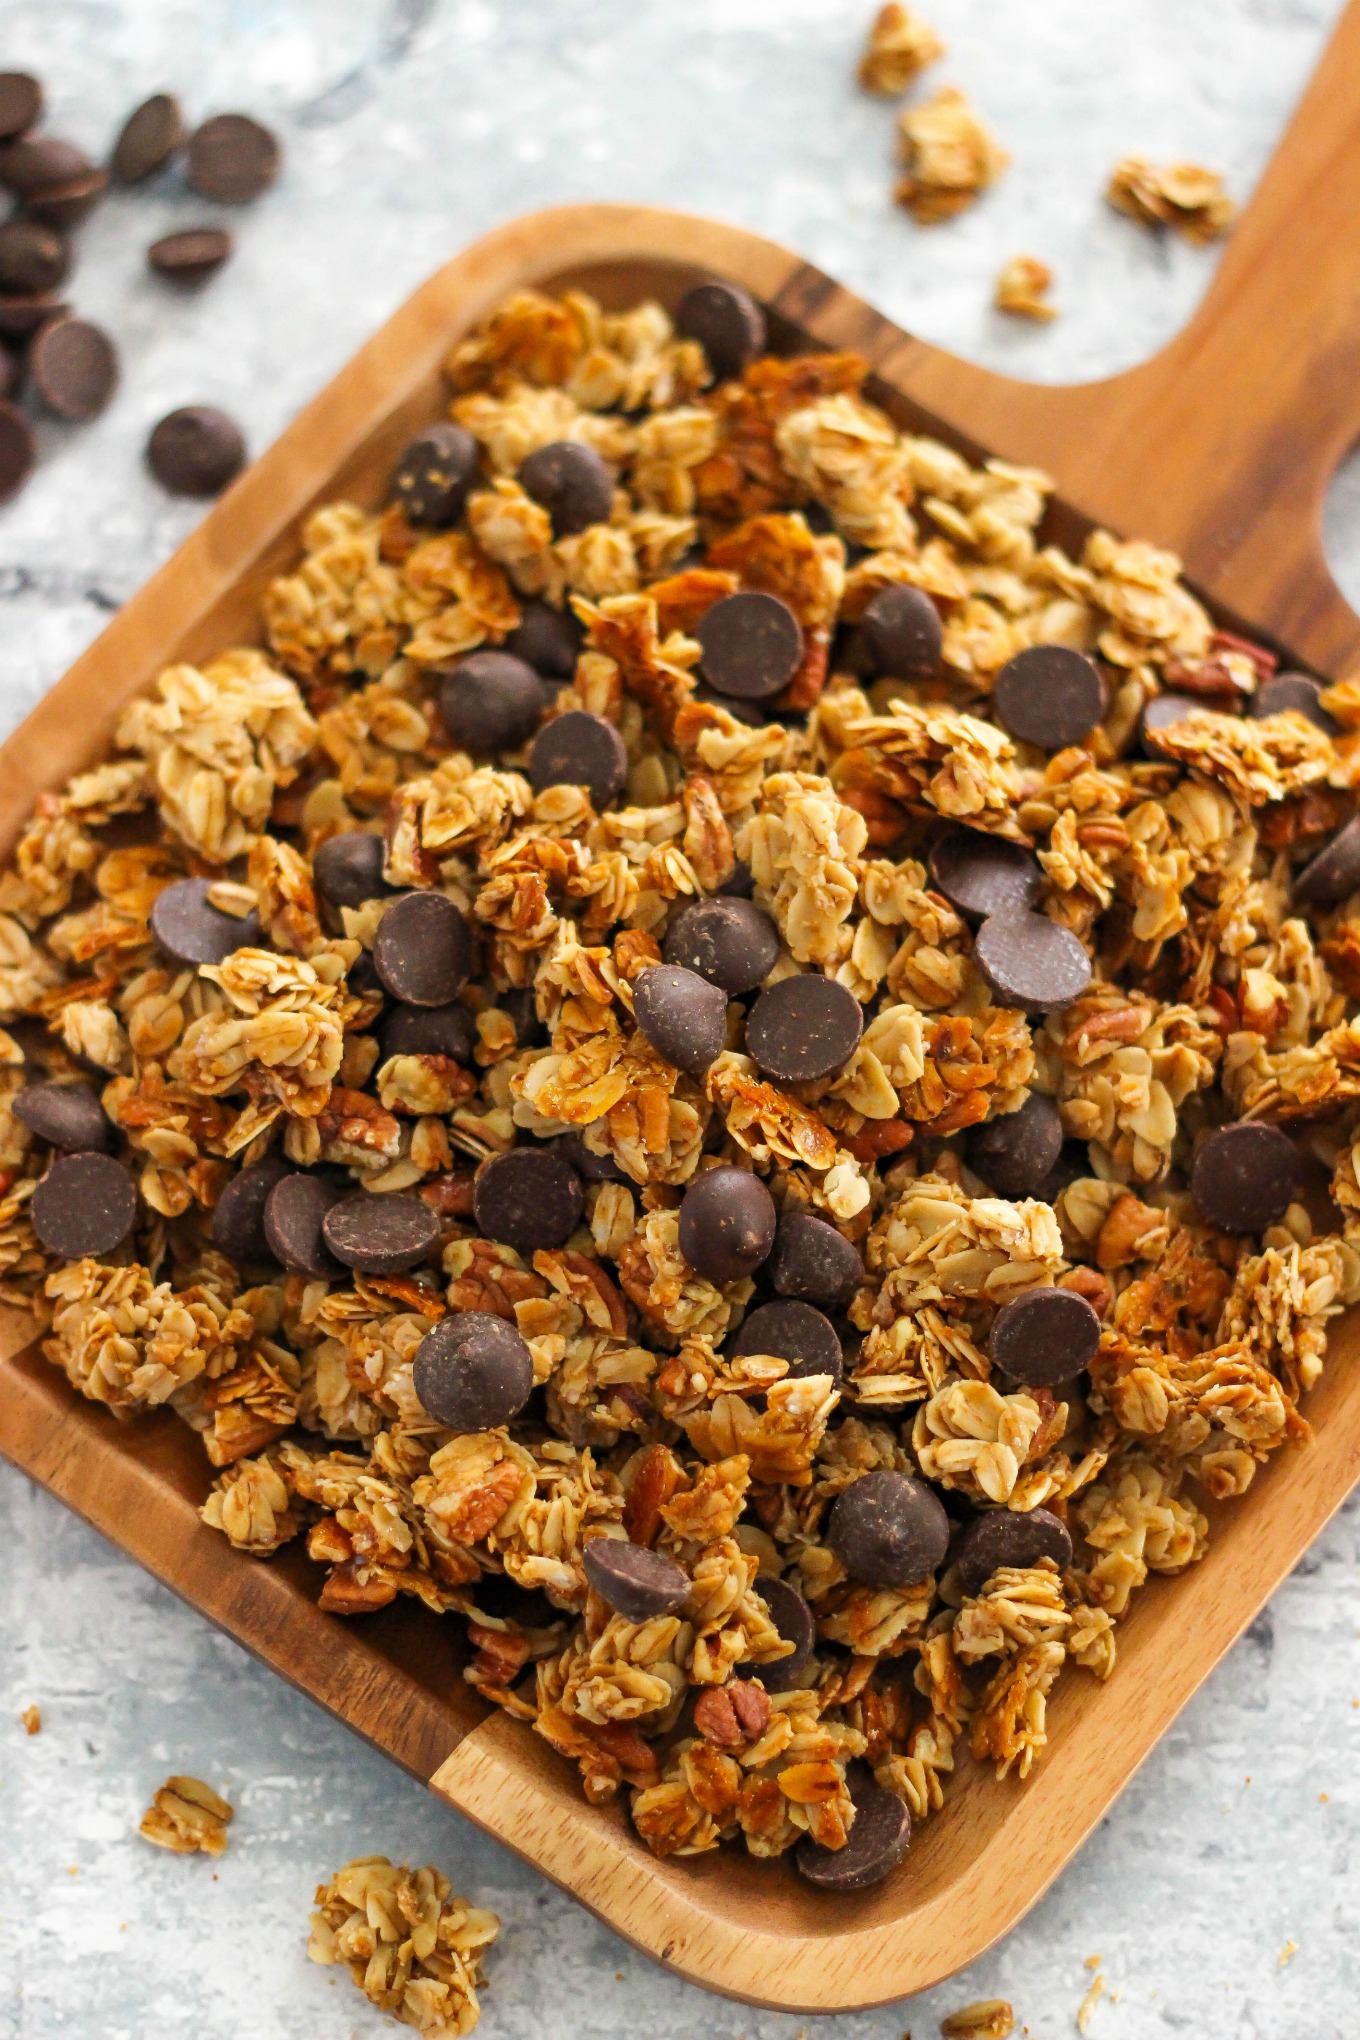 5-Ingredient Chocolate Chip Granola Recipe is an easy and healthy breakfast, snack, or topping option for yogurt and ice cream.